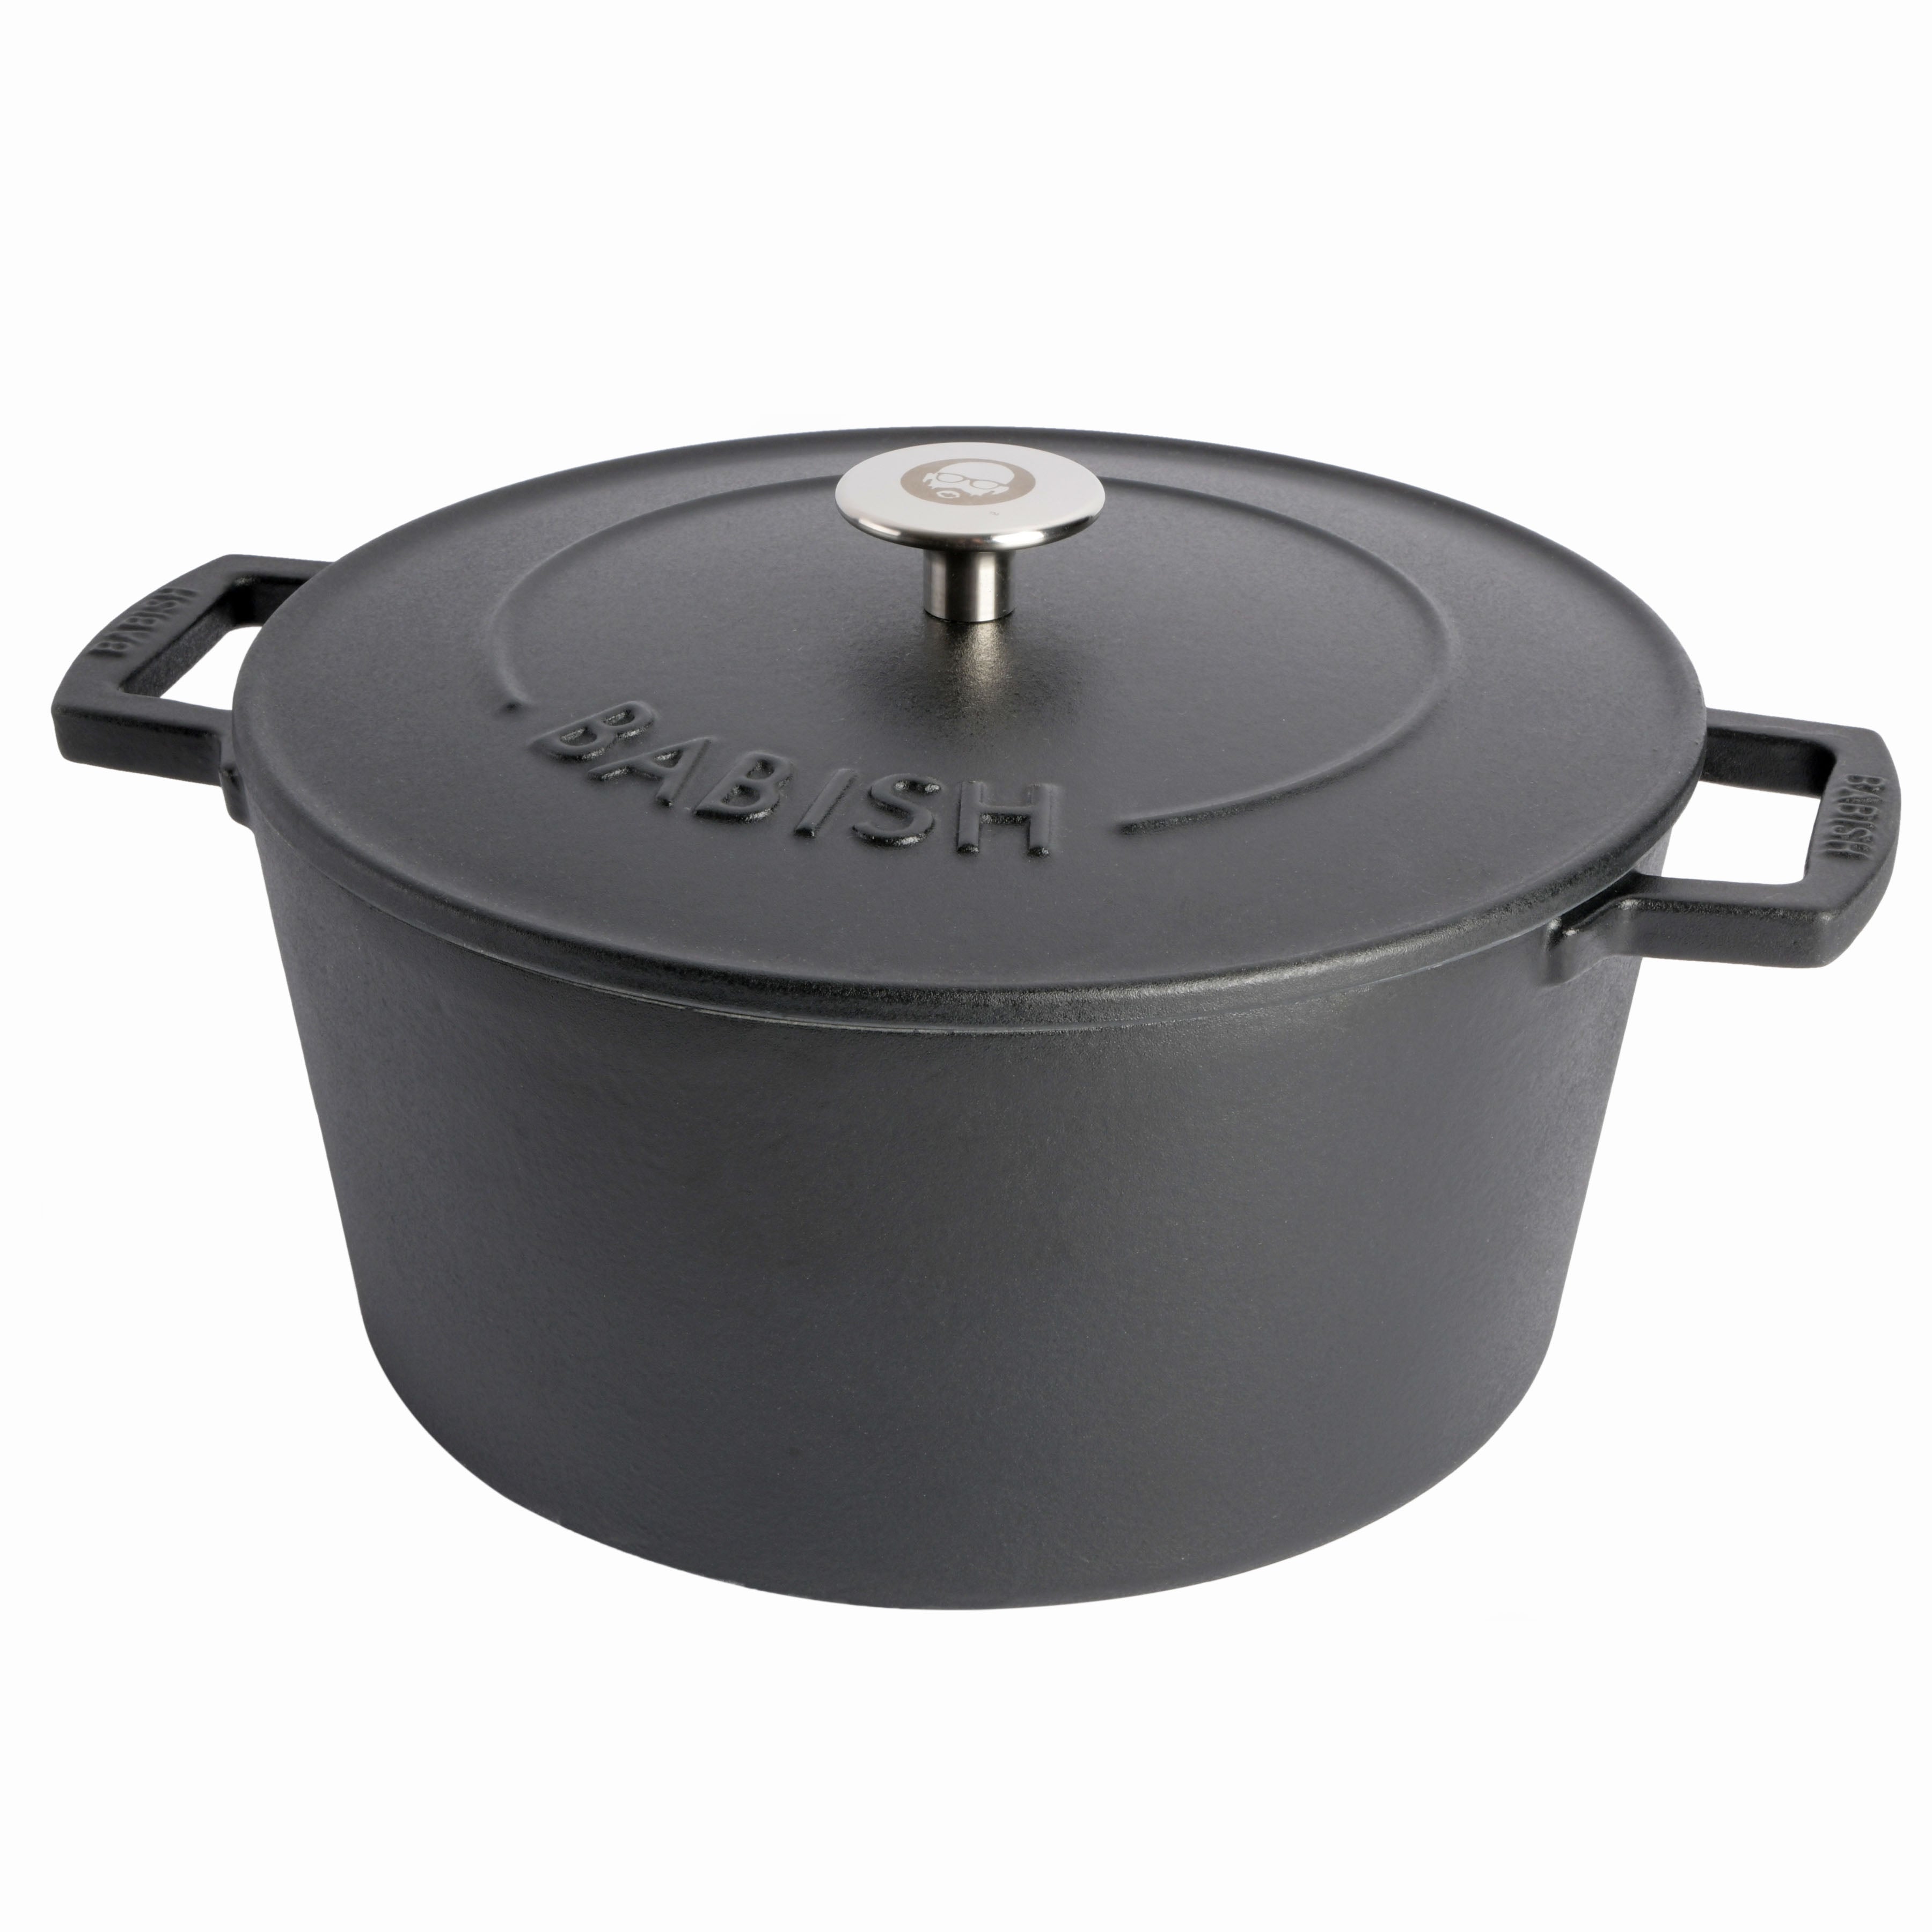 Staub Round Cocotte 5 Qt Yellow (French Oven)